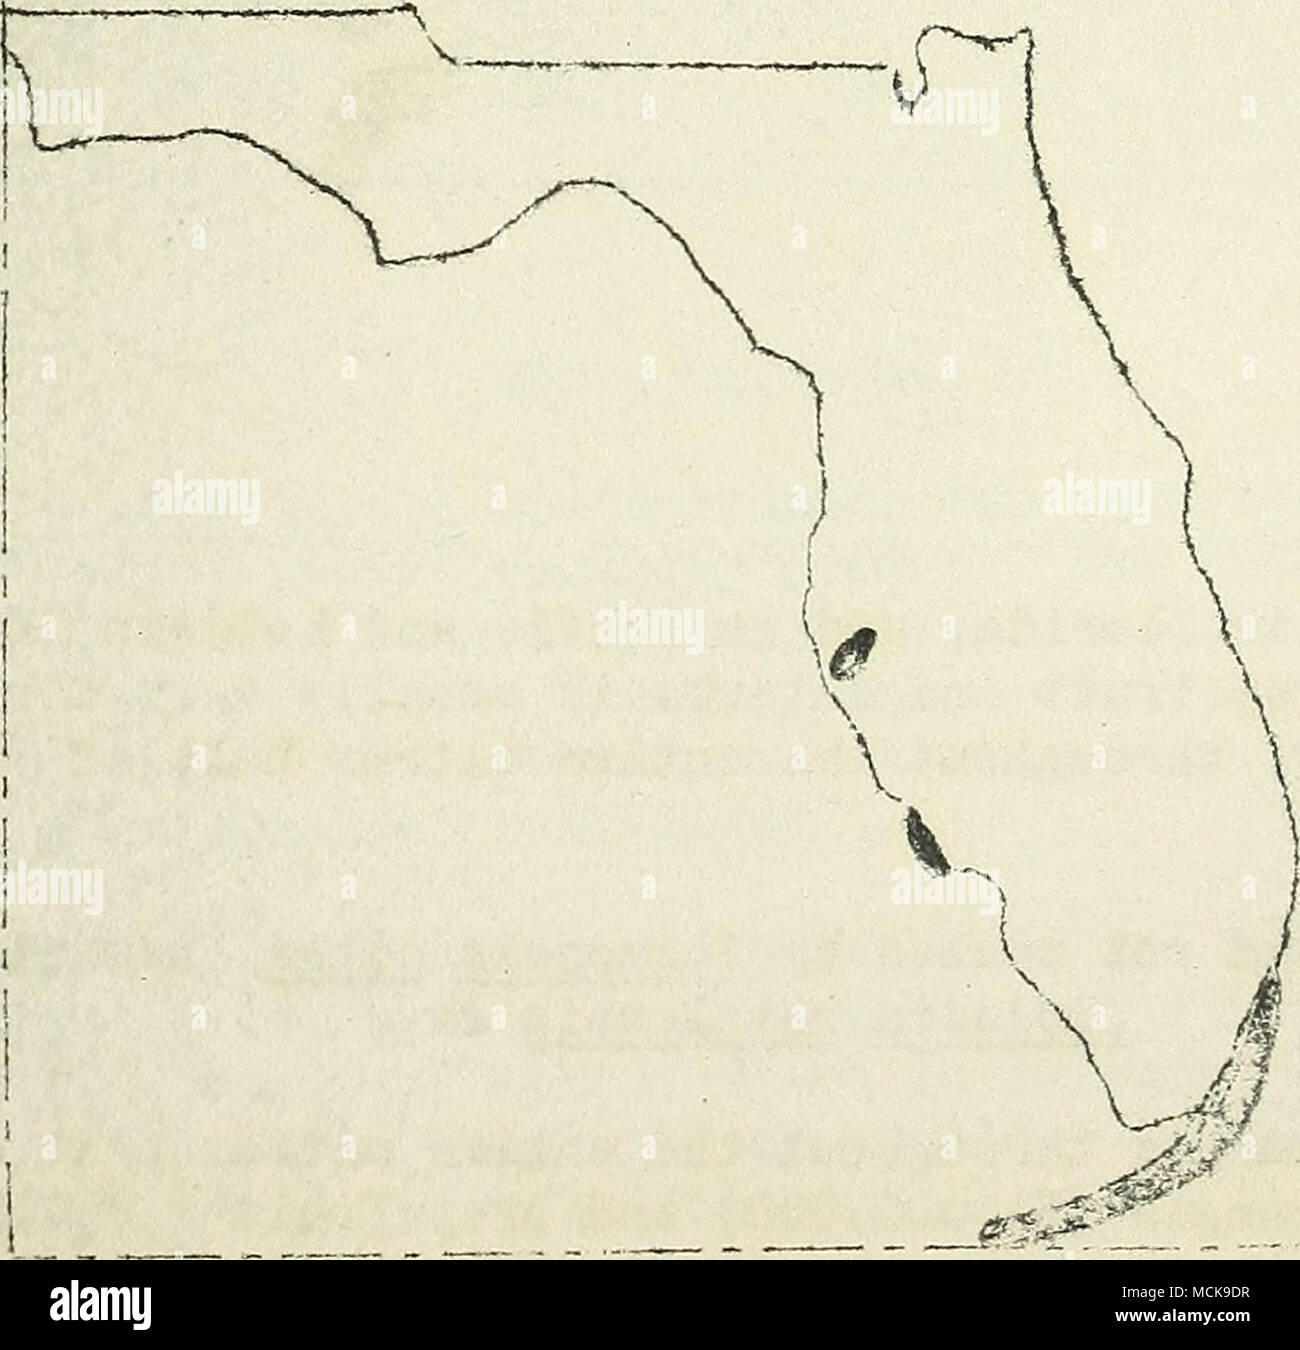 . Pig. 18. Vdthertip of limes in Florida. Shades areas indicate regions where the disease was most severe in 1920 according to J. R. Winston Withertip of limes caused by Gloeosporium limetticolum Clausen Stock Photo